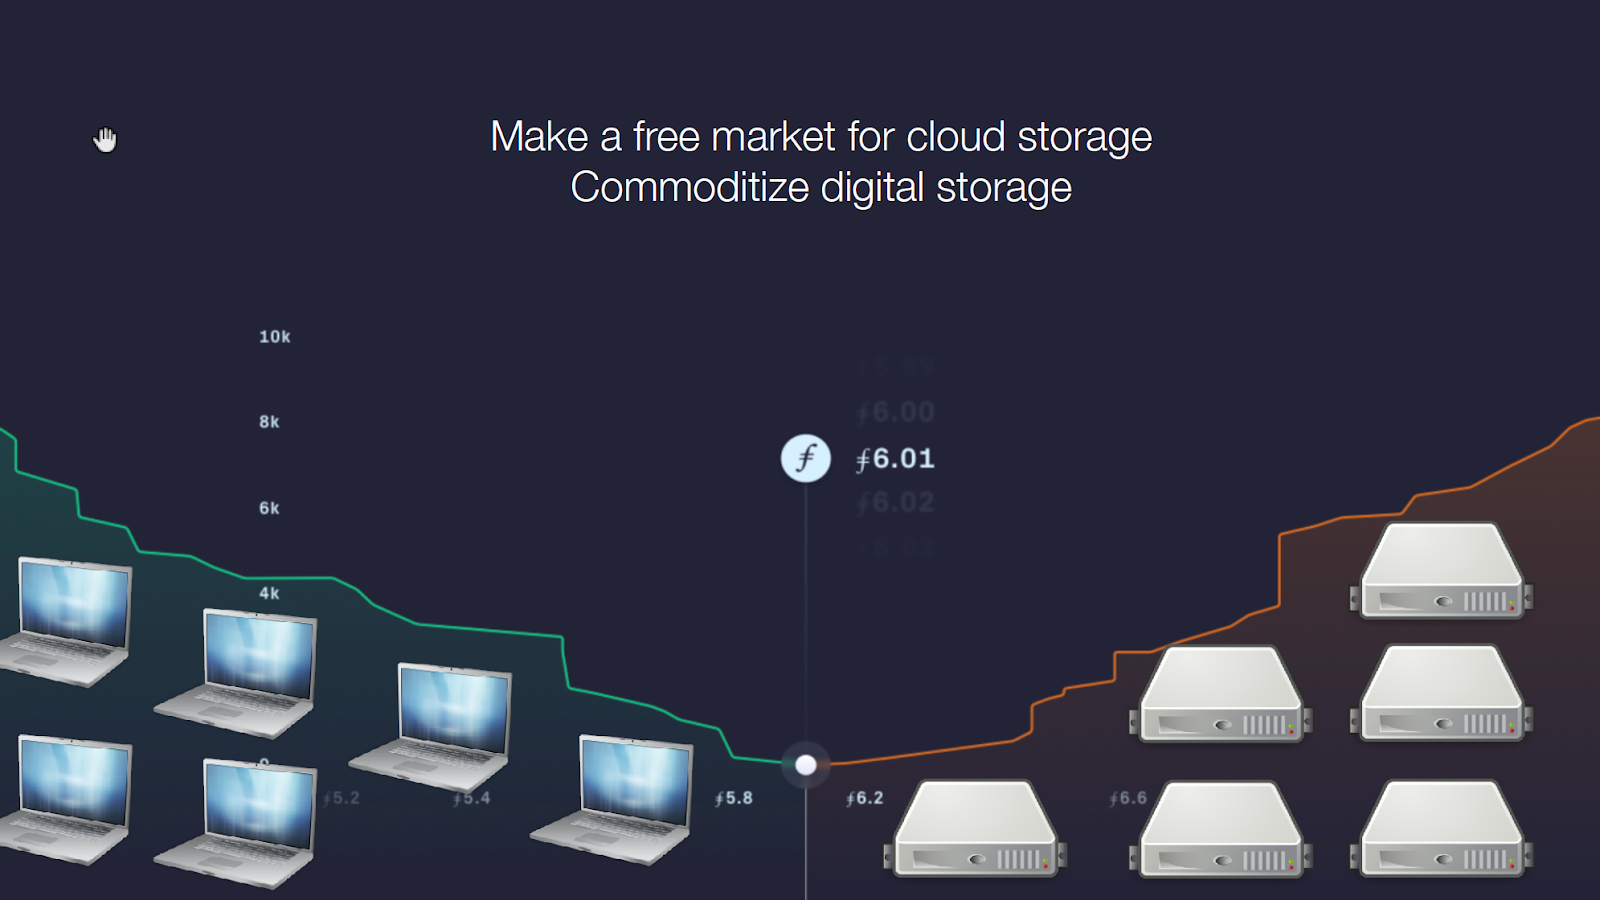 Filecoin enables free market for storage